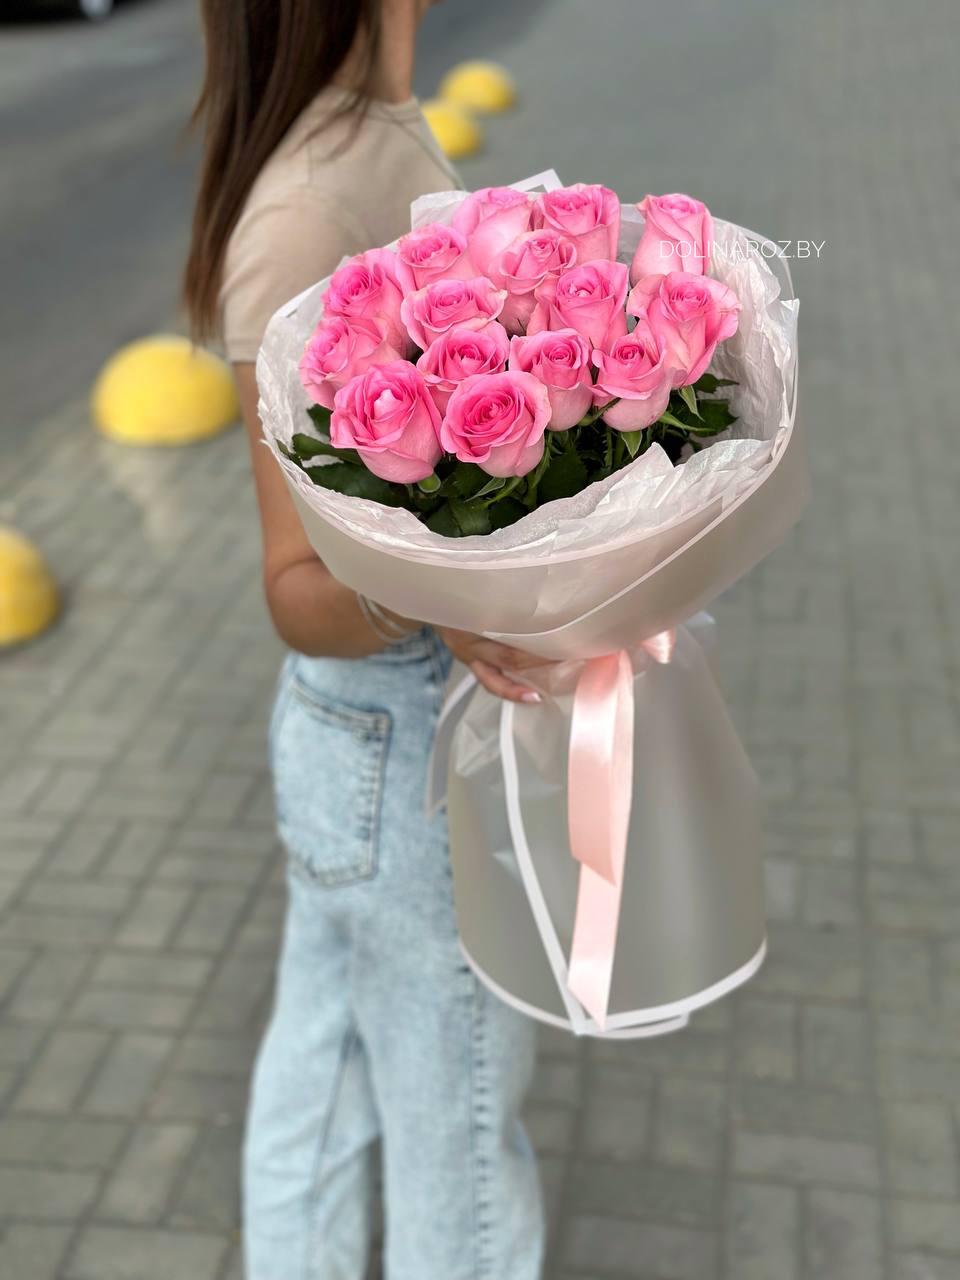 Bouquet of roses "Message"